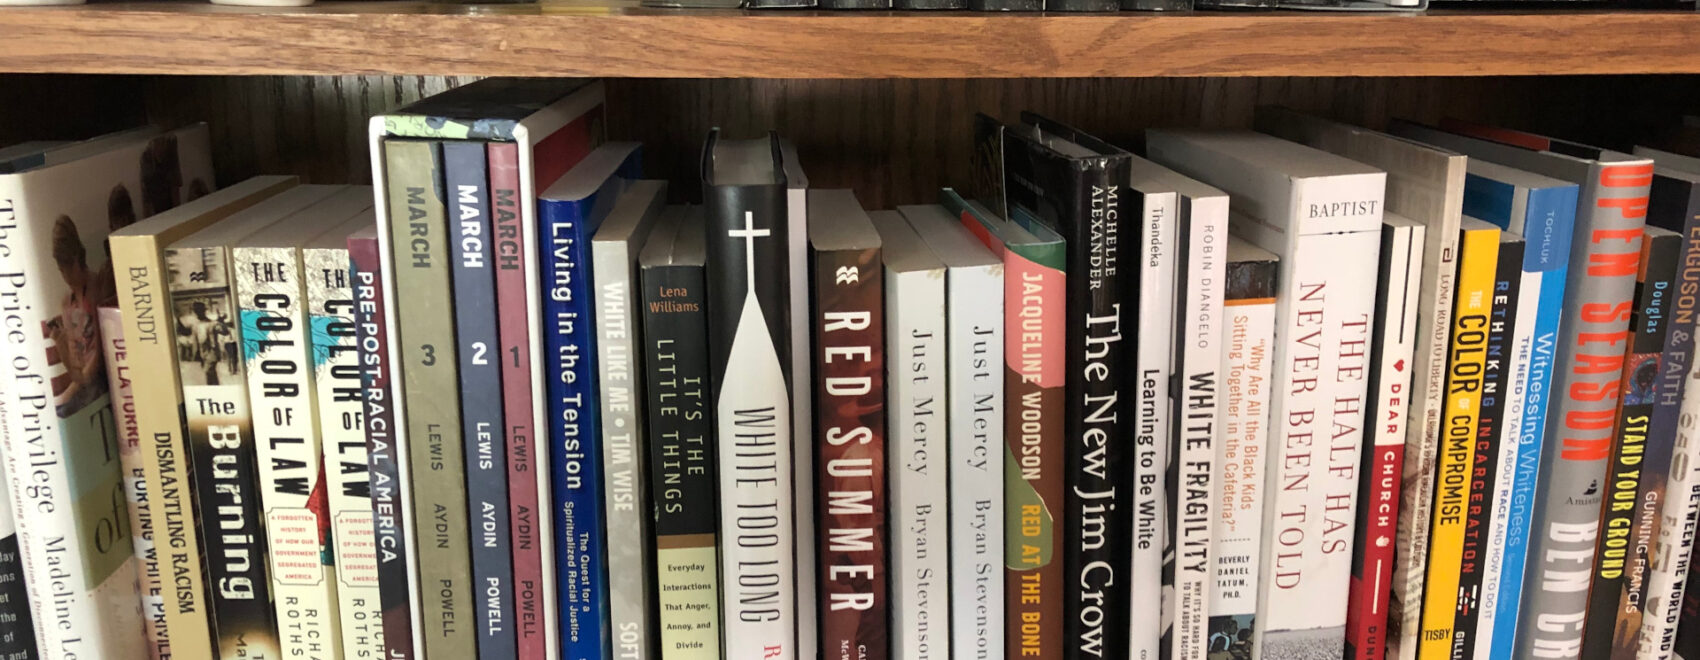 Books on a shelf from the Racial Justice Reading List